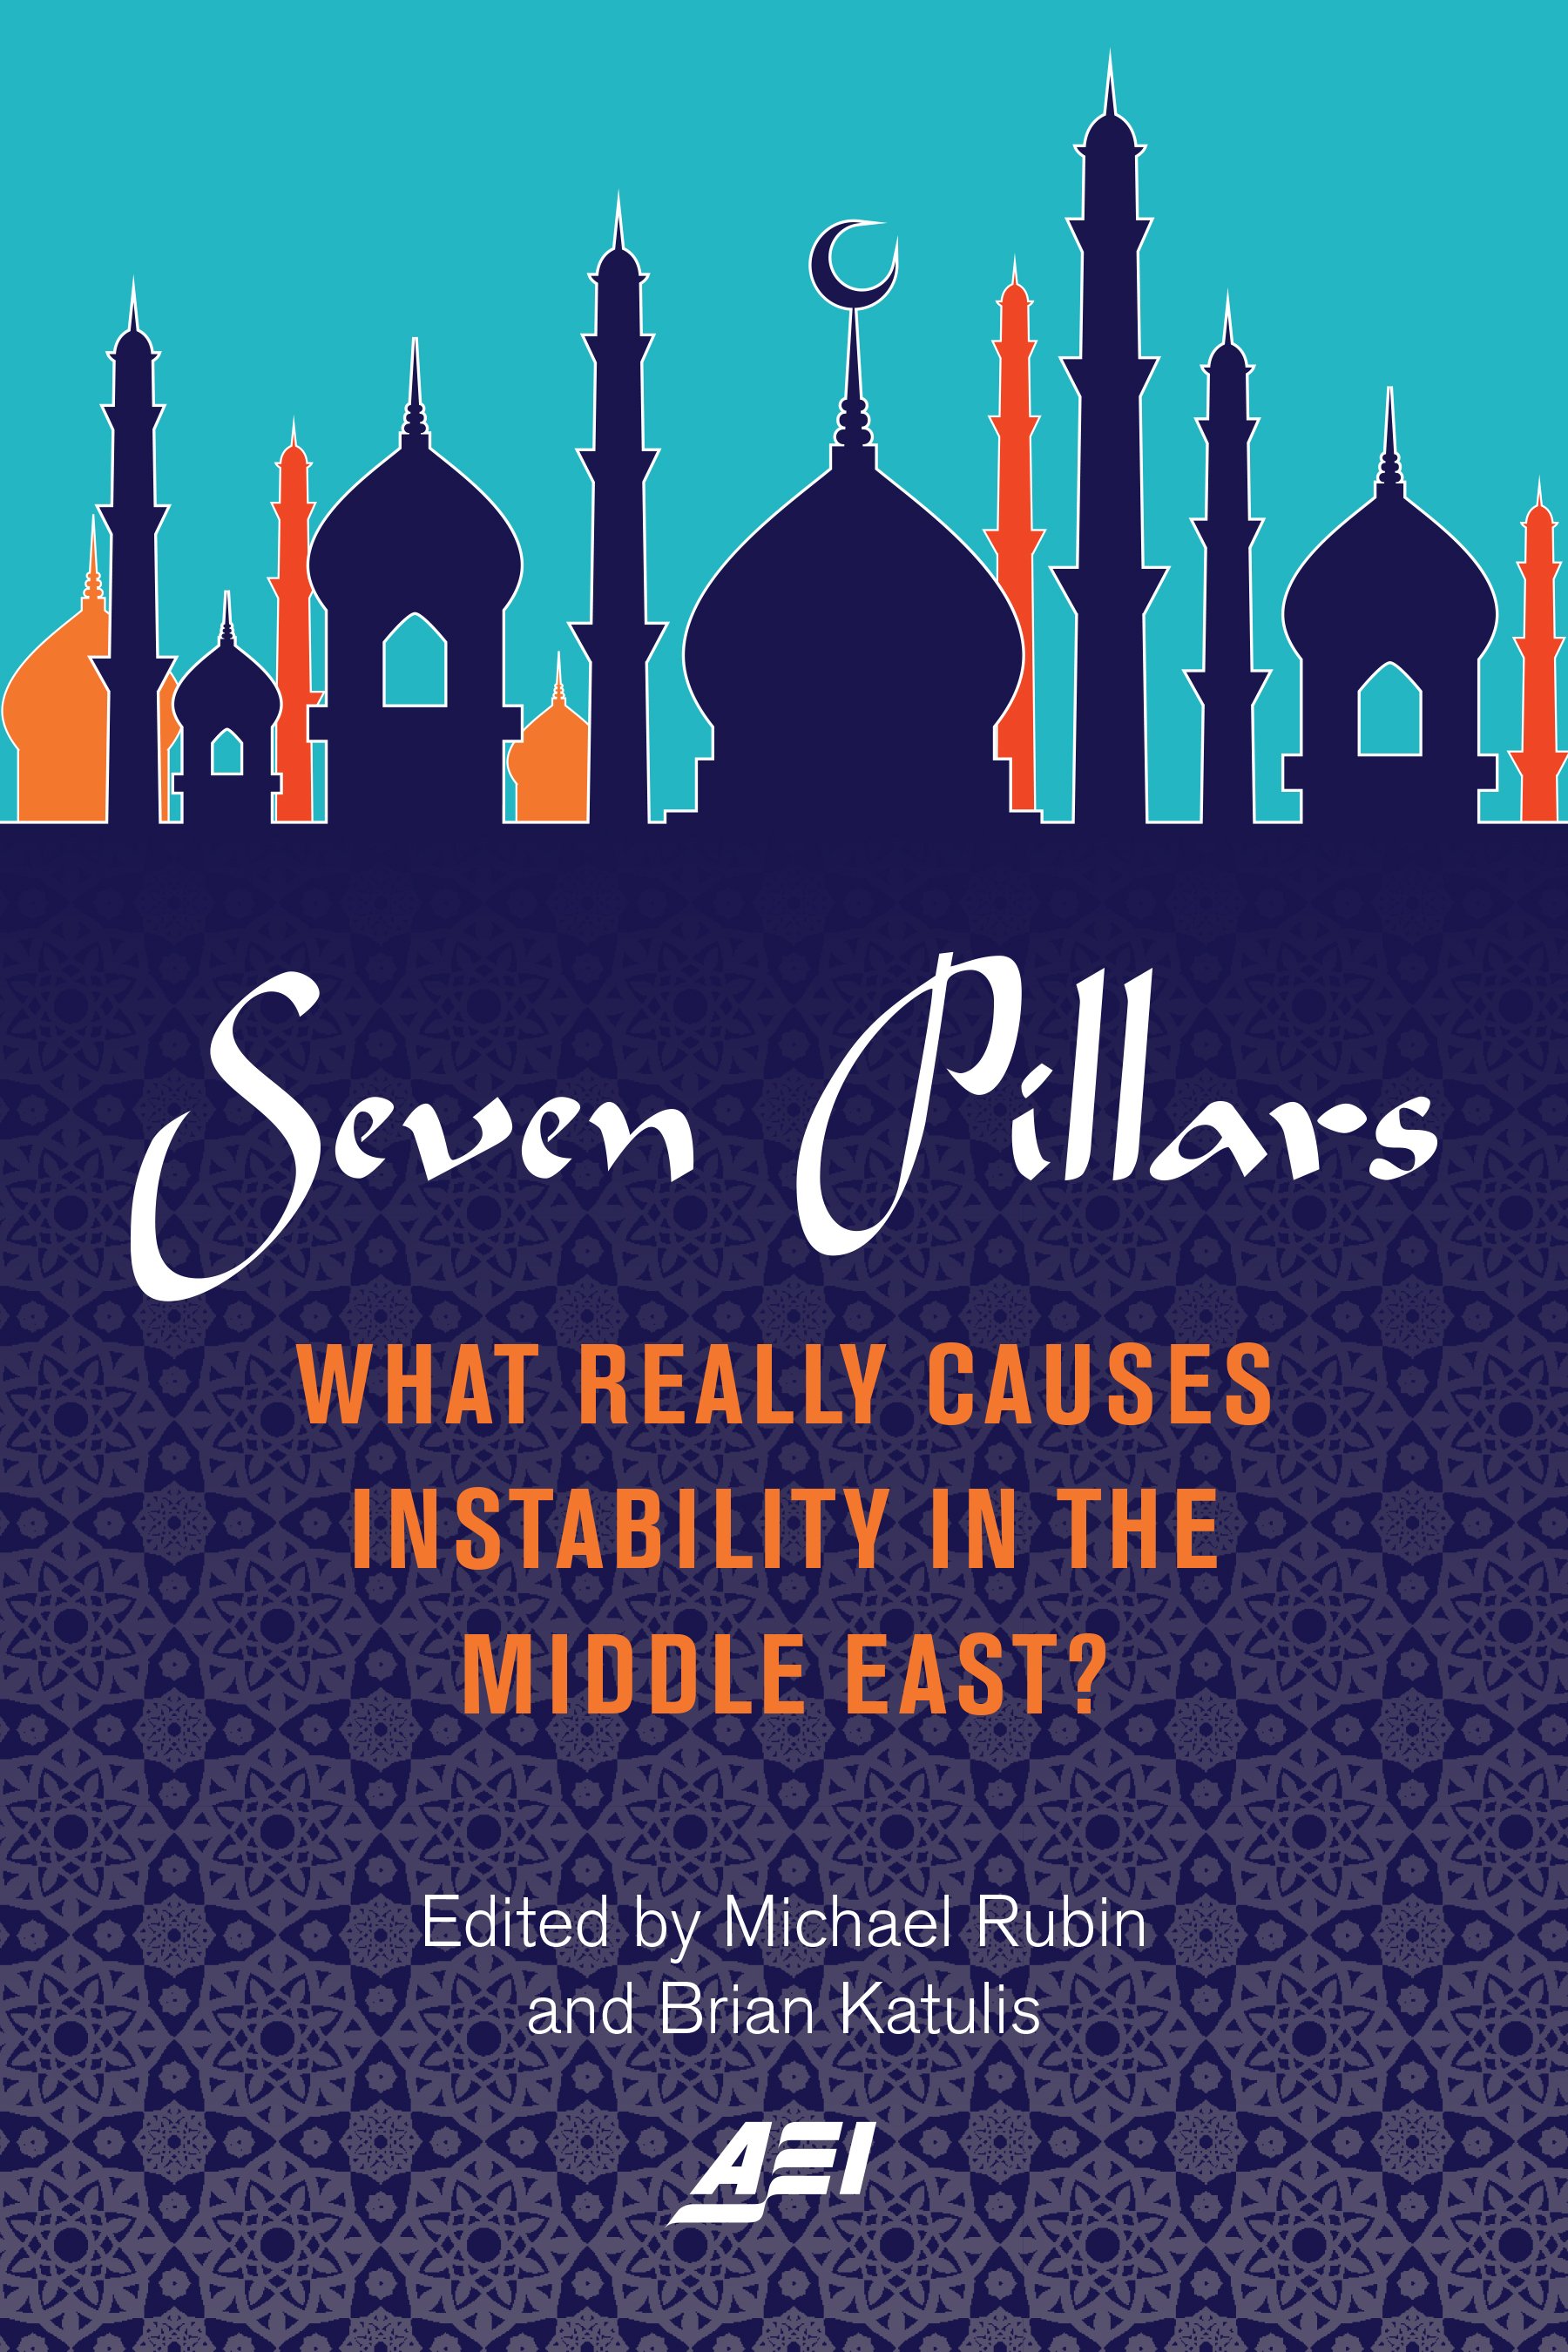 Cover for the book, "Seven Pillars: What Really Causes Instability in the Middle East?", by AEI scholar Michael Rubin